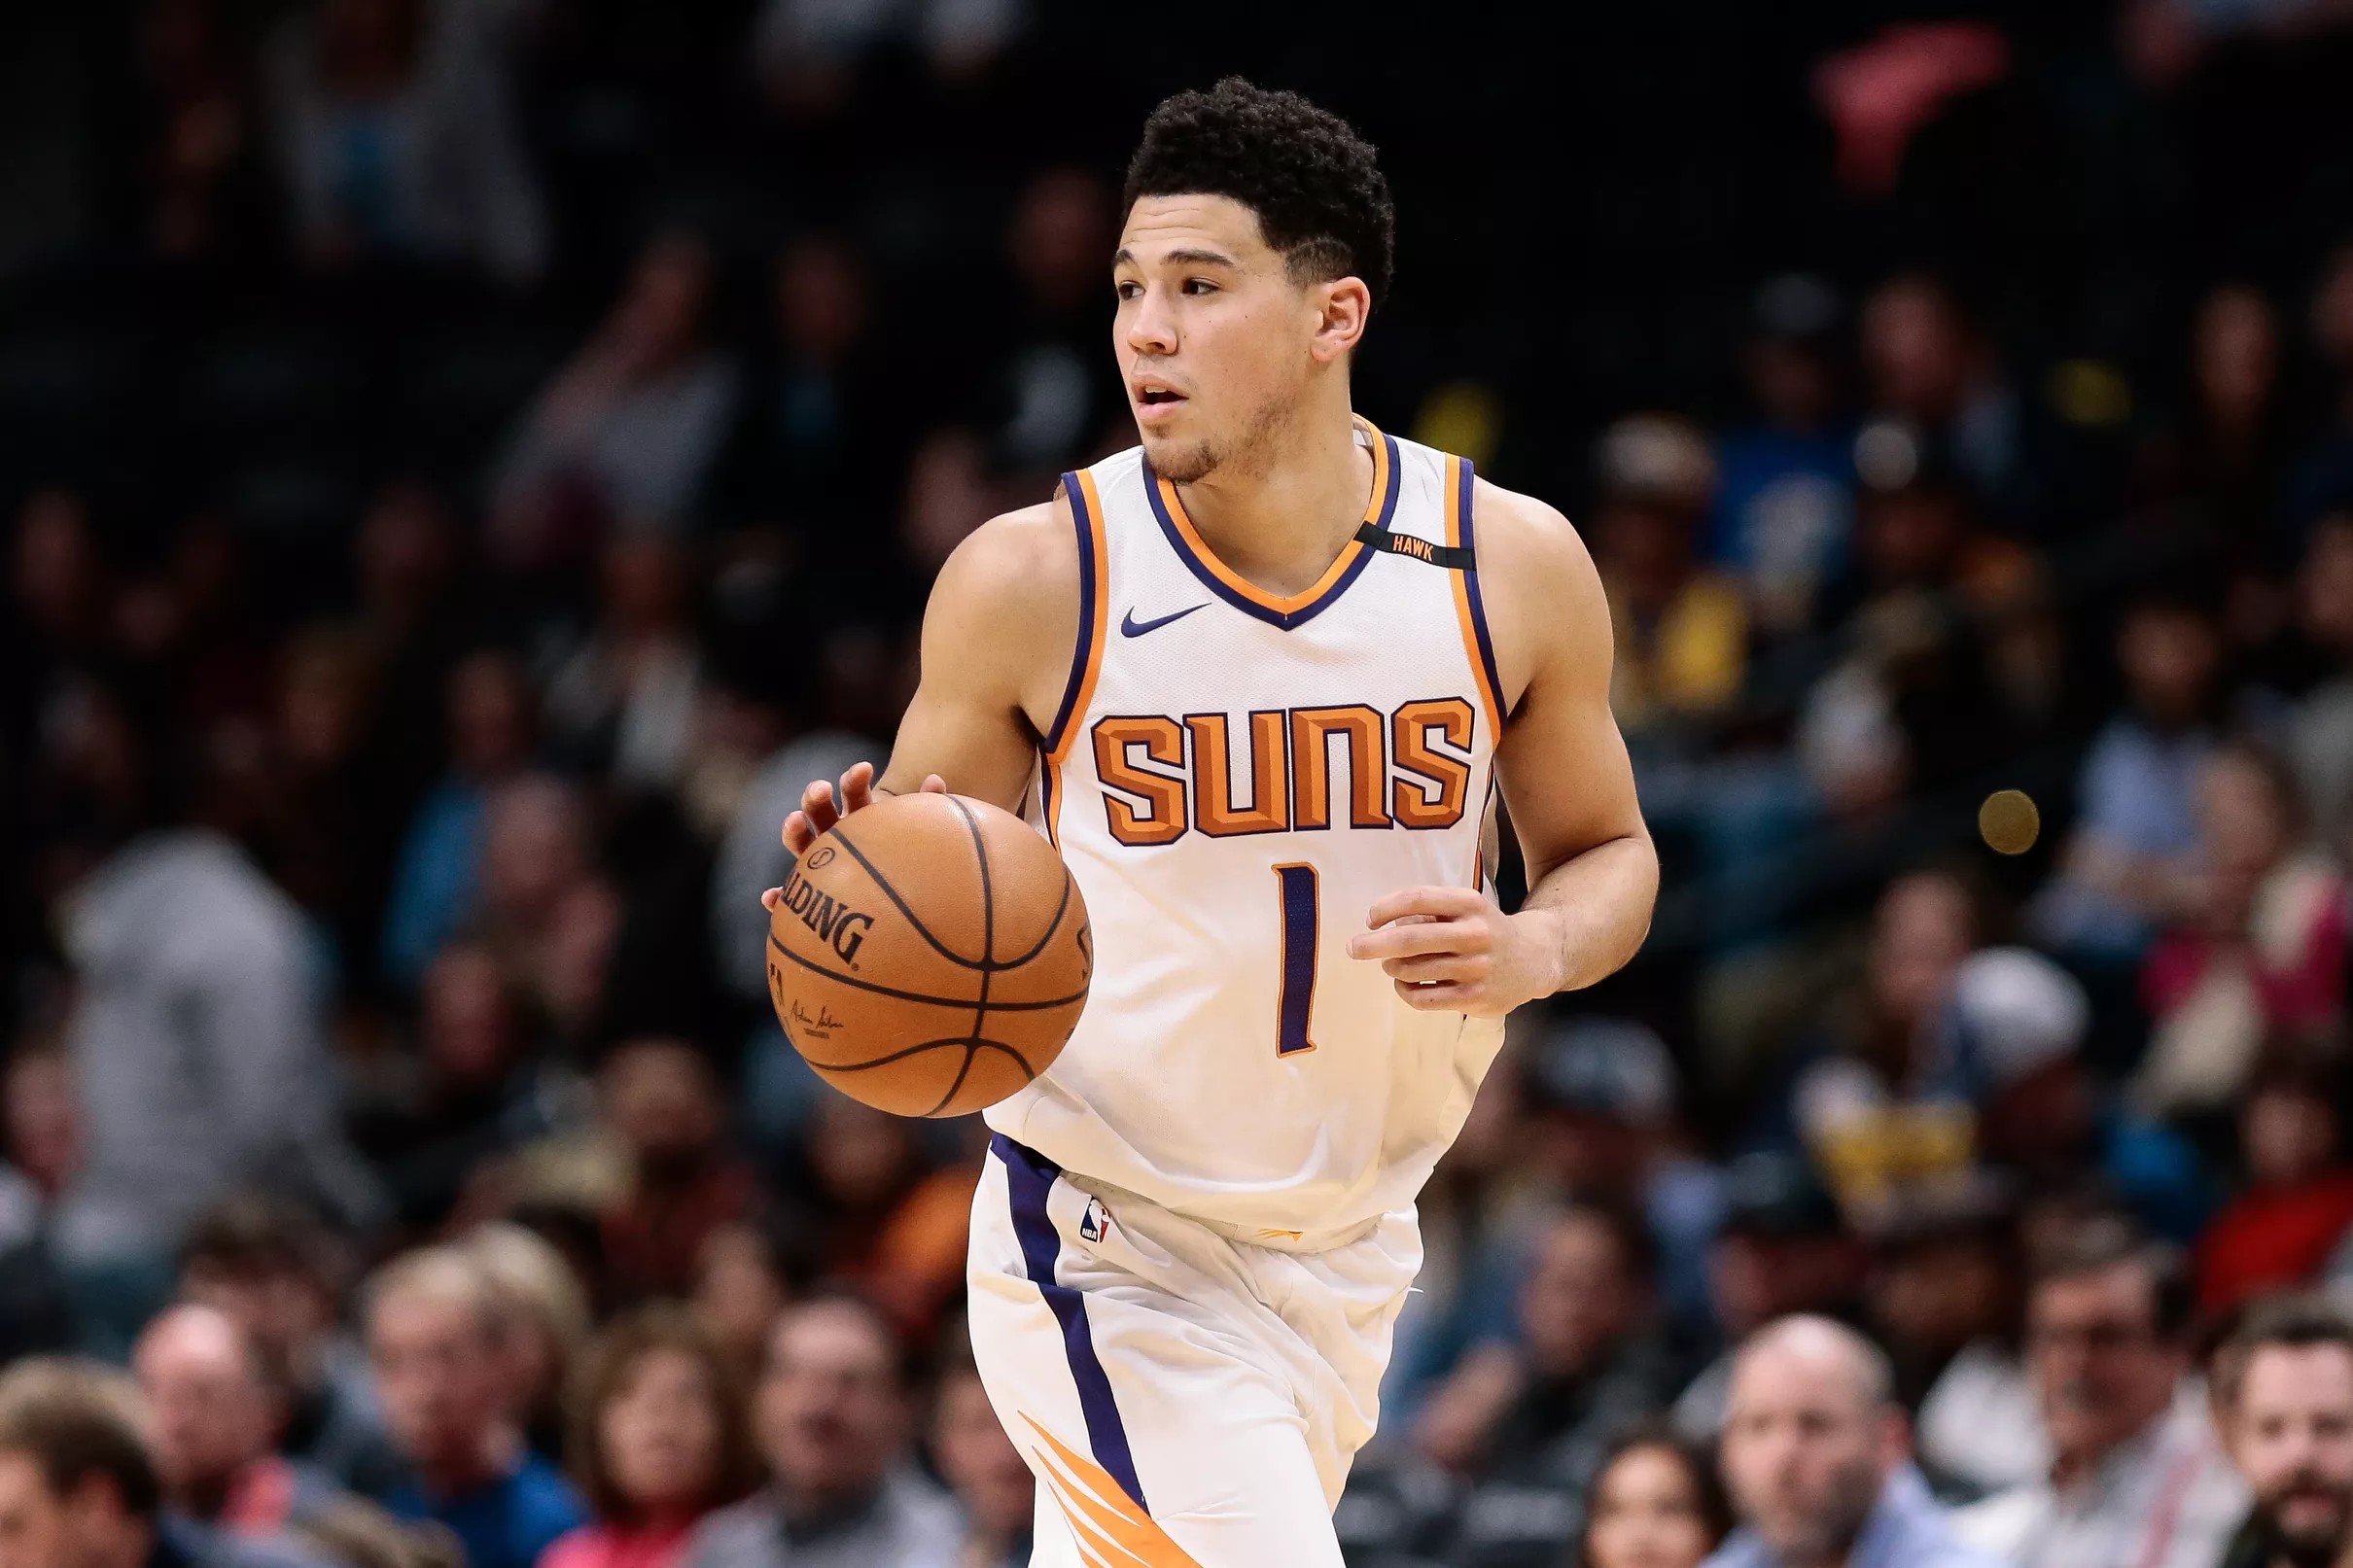 Devin Booker is the youngest player named to USA Basketball’s Men’s